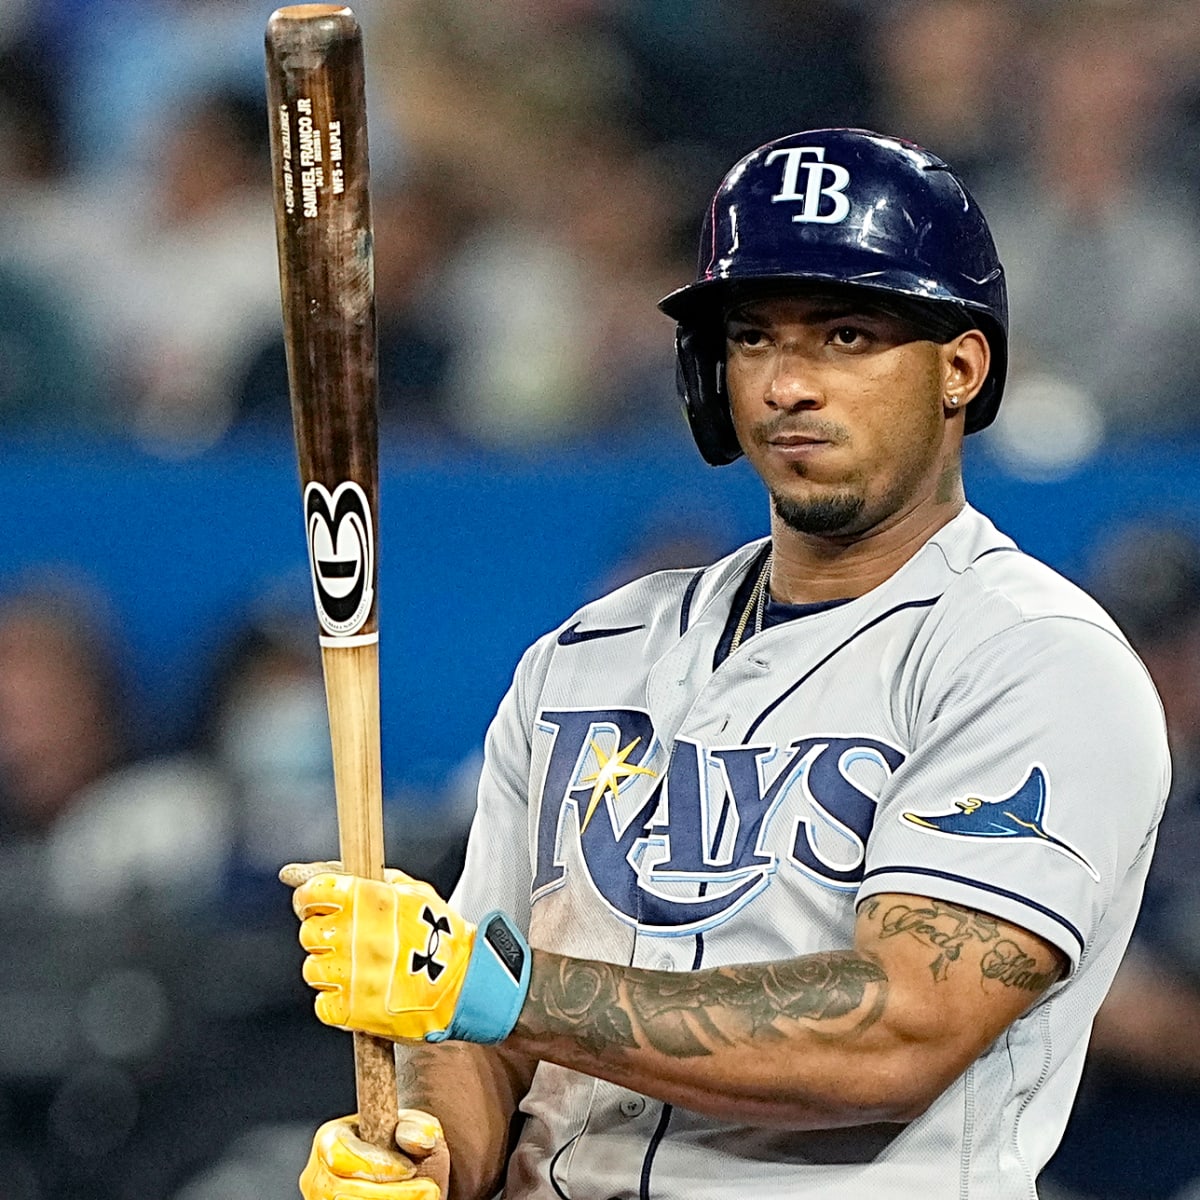 Wander Franco: Tampa Bay Rays shortstop placed on indefinite